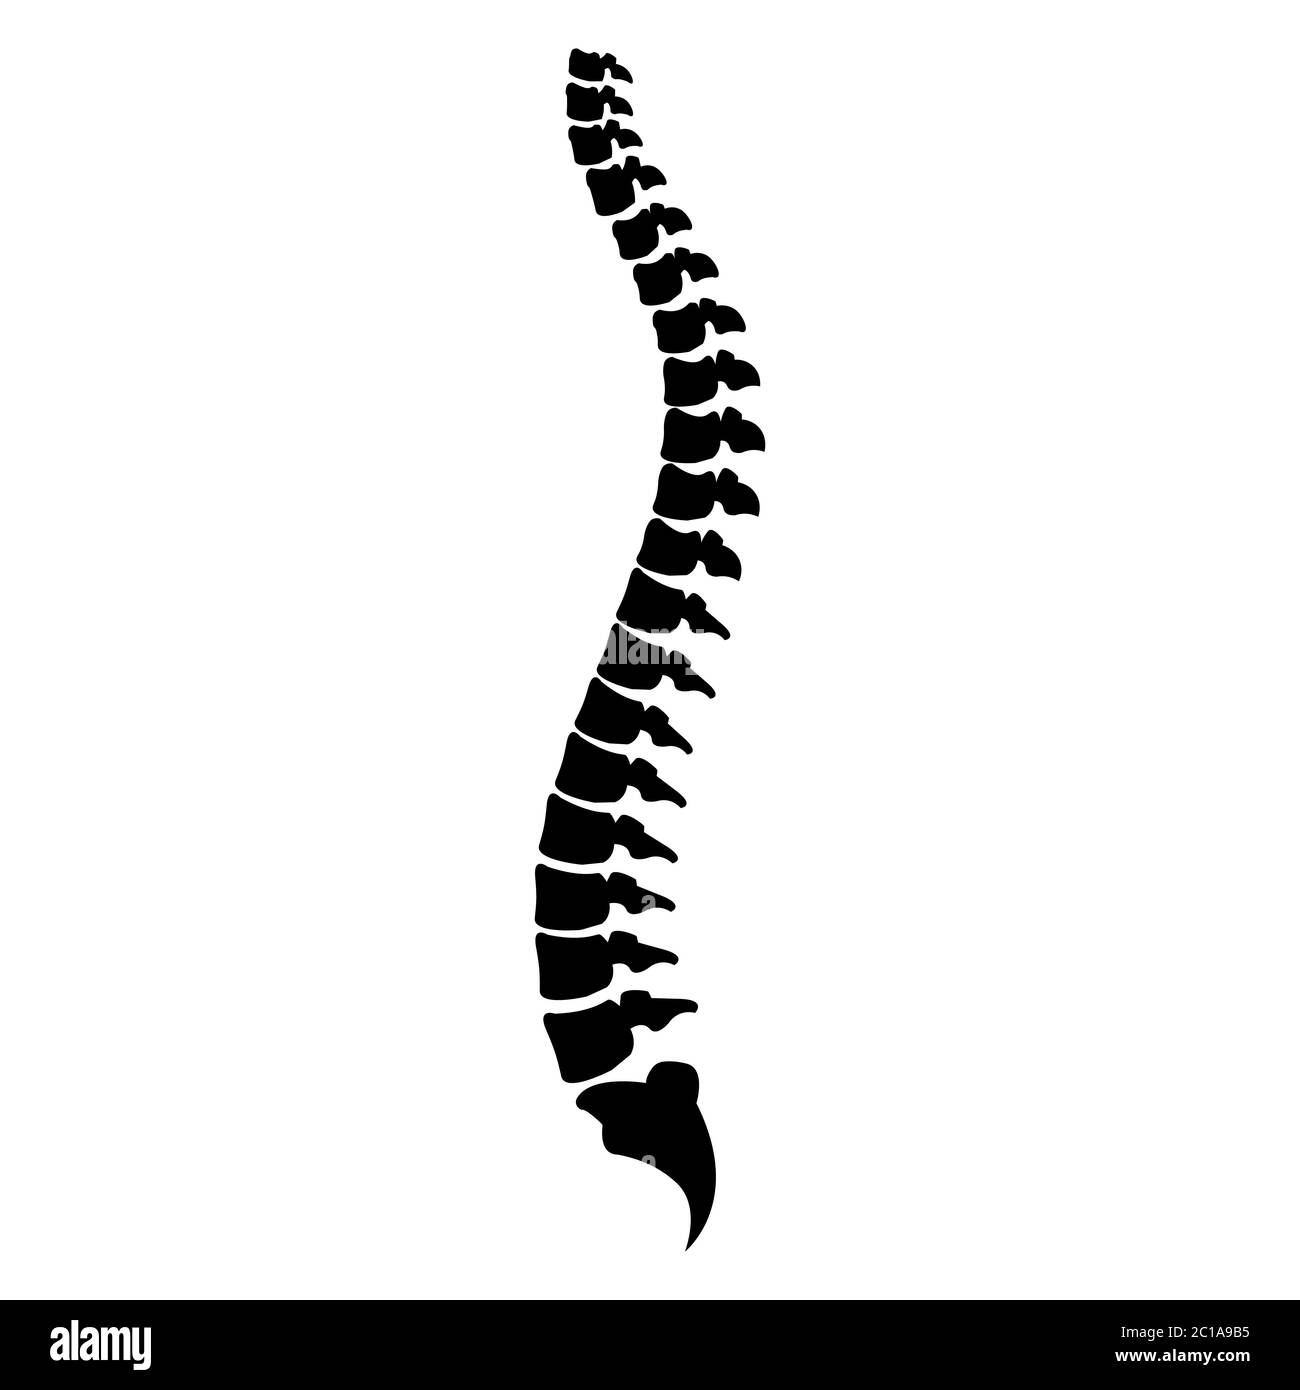 Spine cord vector icon illustration isolated on white background Stock Vector